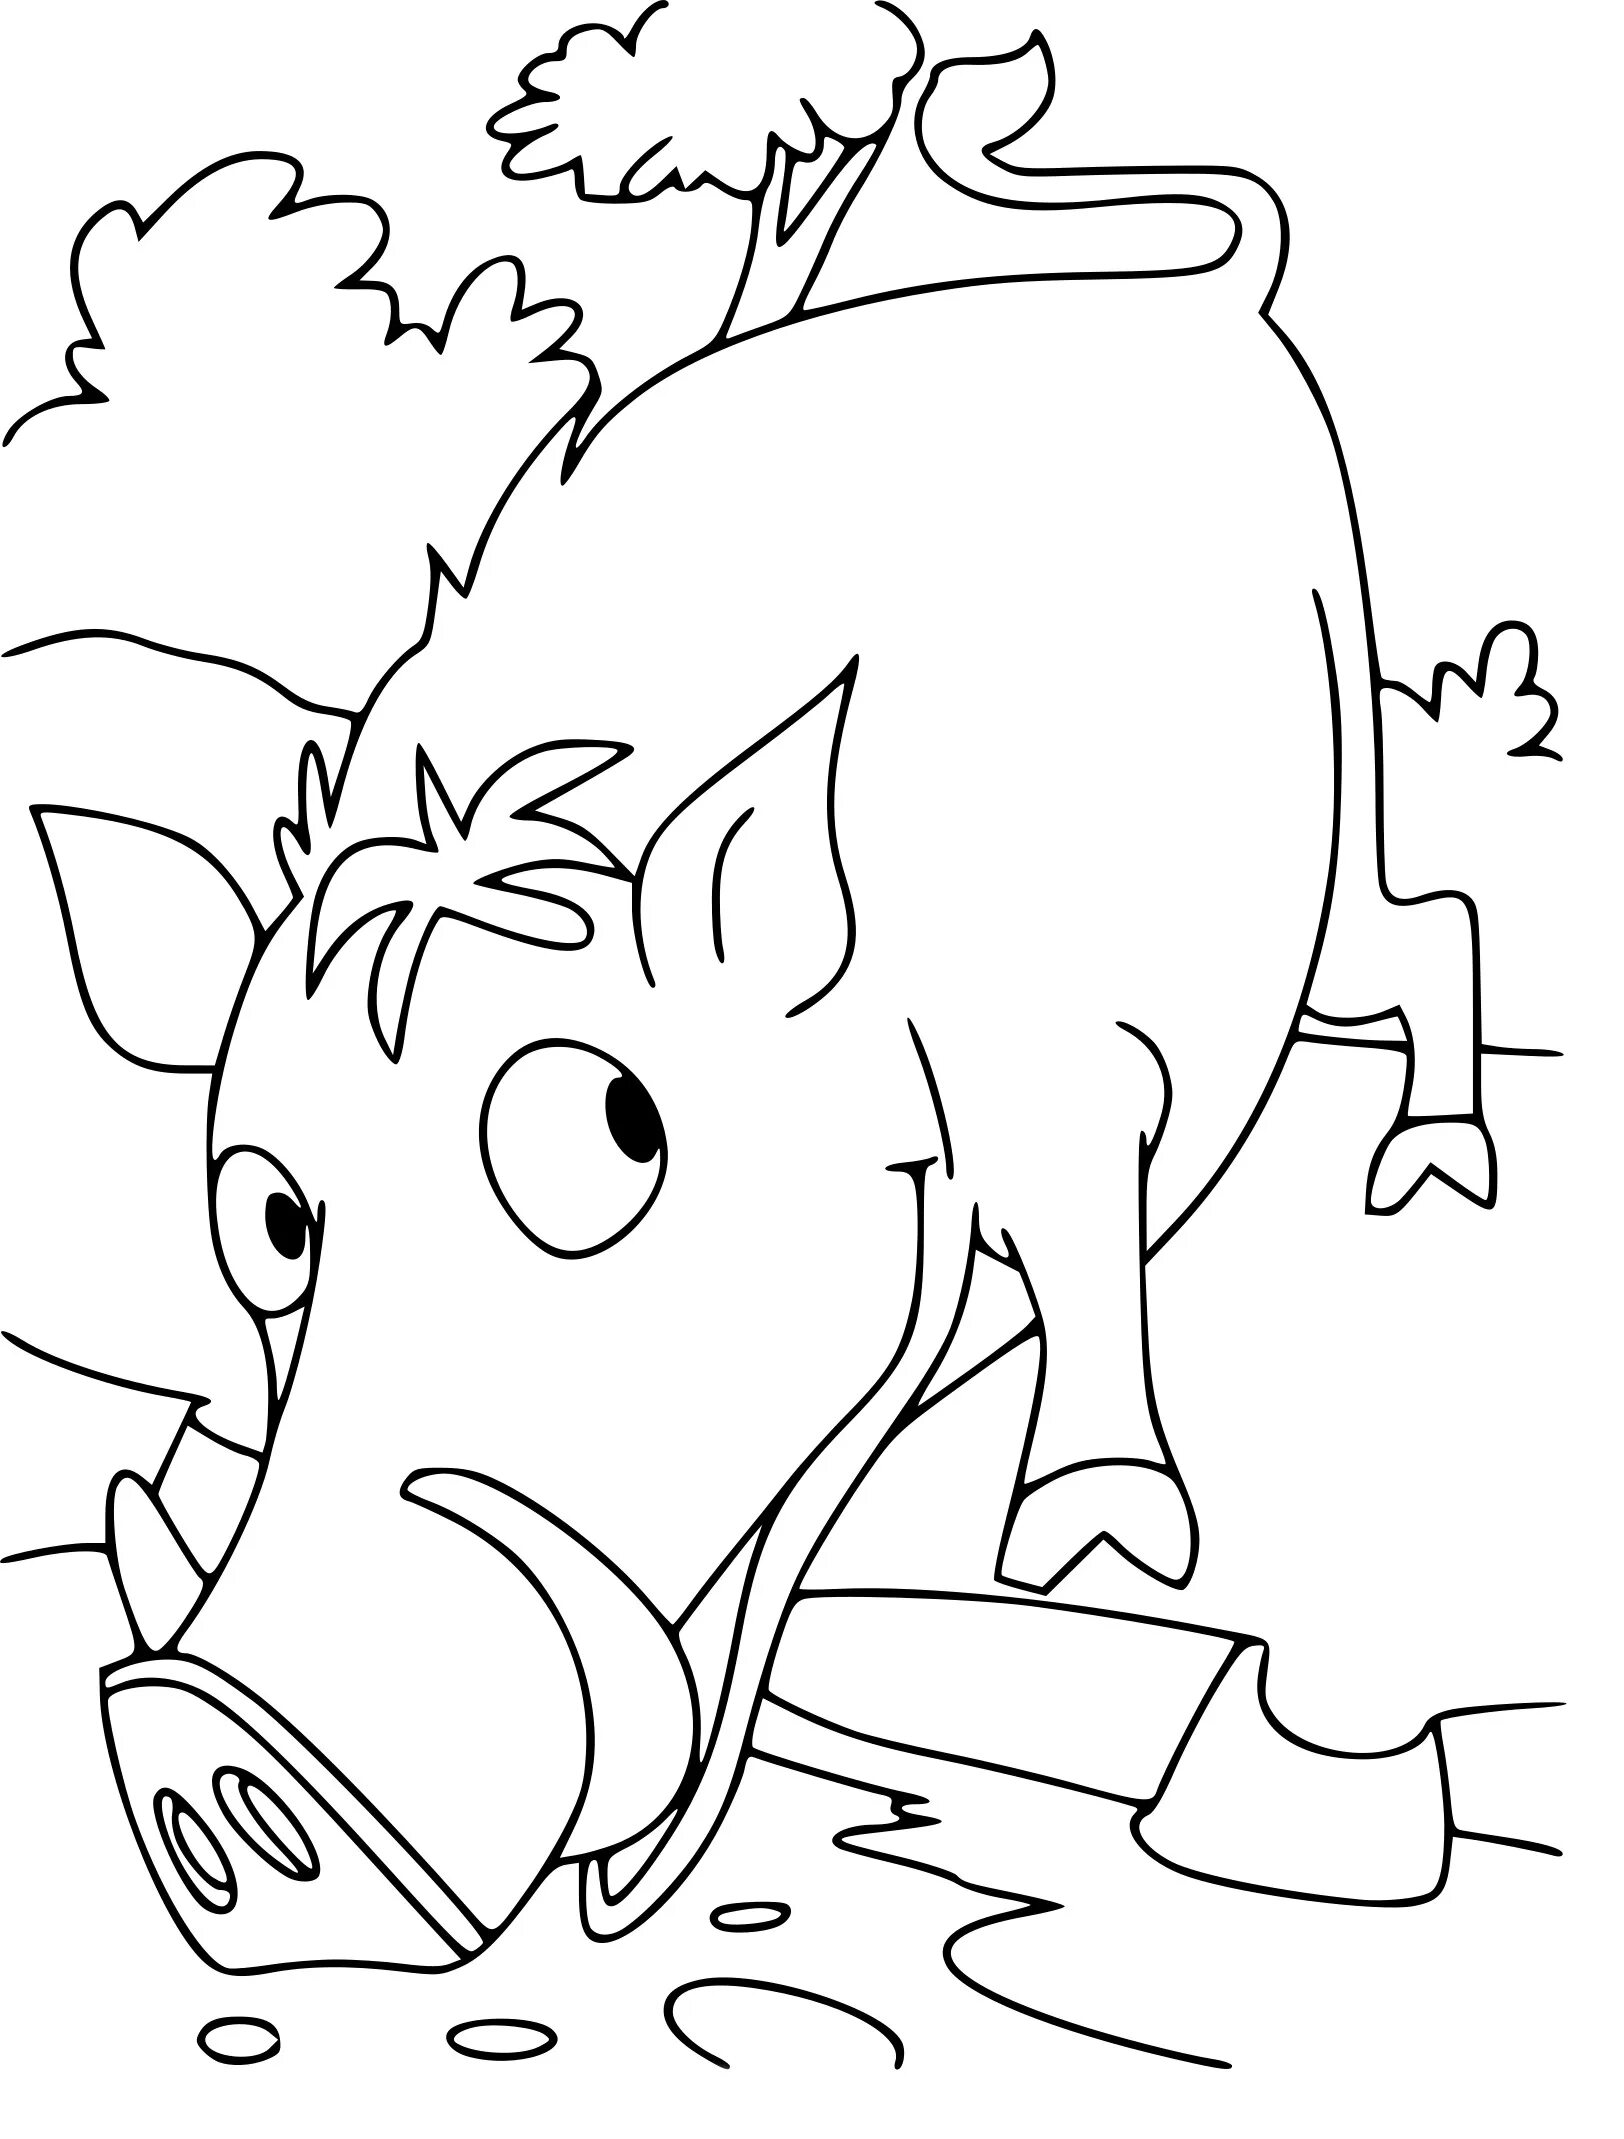 Majestic boar coloring page